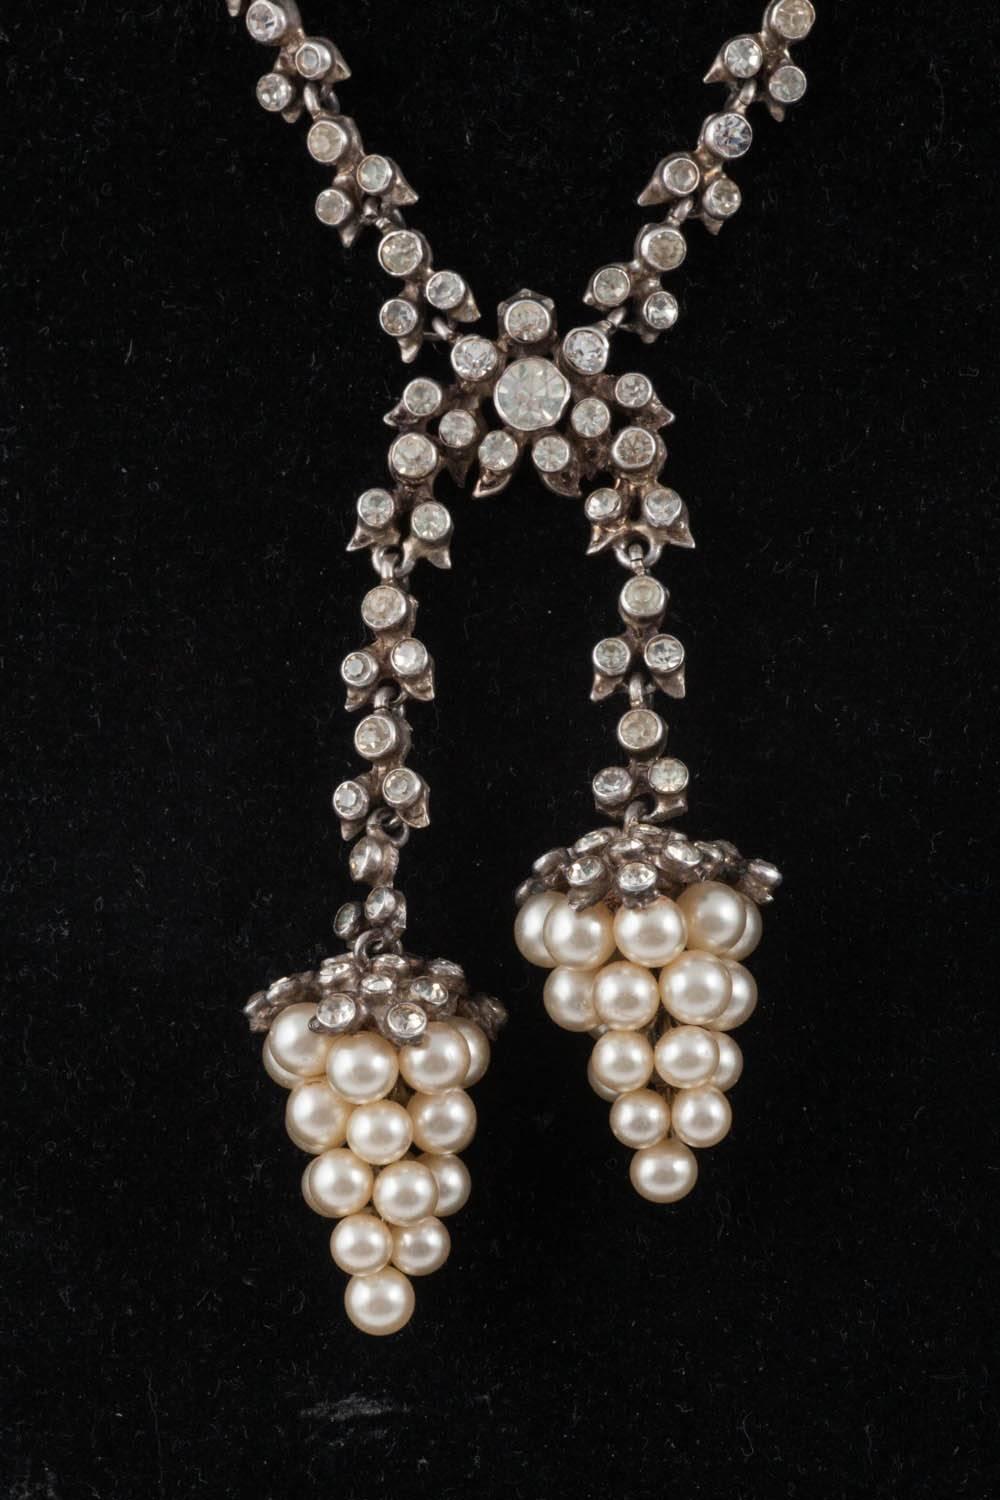 A beautiful and elegant set of a double pendant necklace and drop earrings, in sterling silver, from the 1900s.
The 'grape' motif runs throughout, suspended from each of the two terminals, and from the bottom of the matching earrings. The pearl